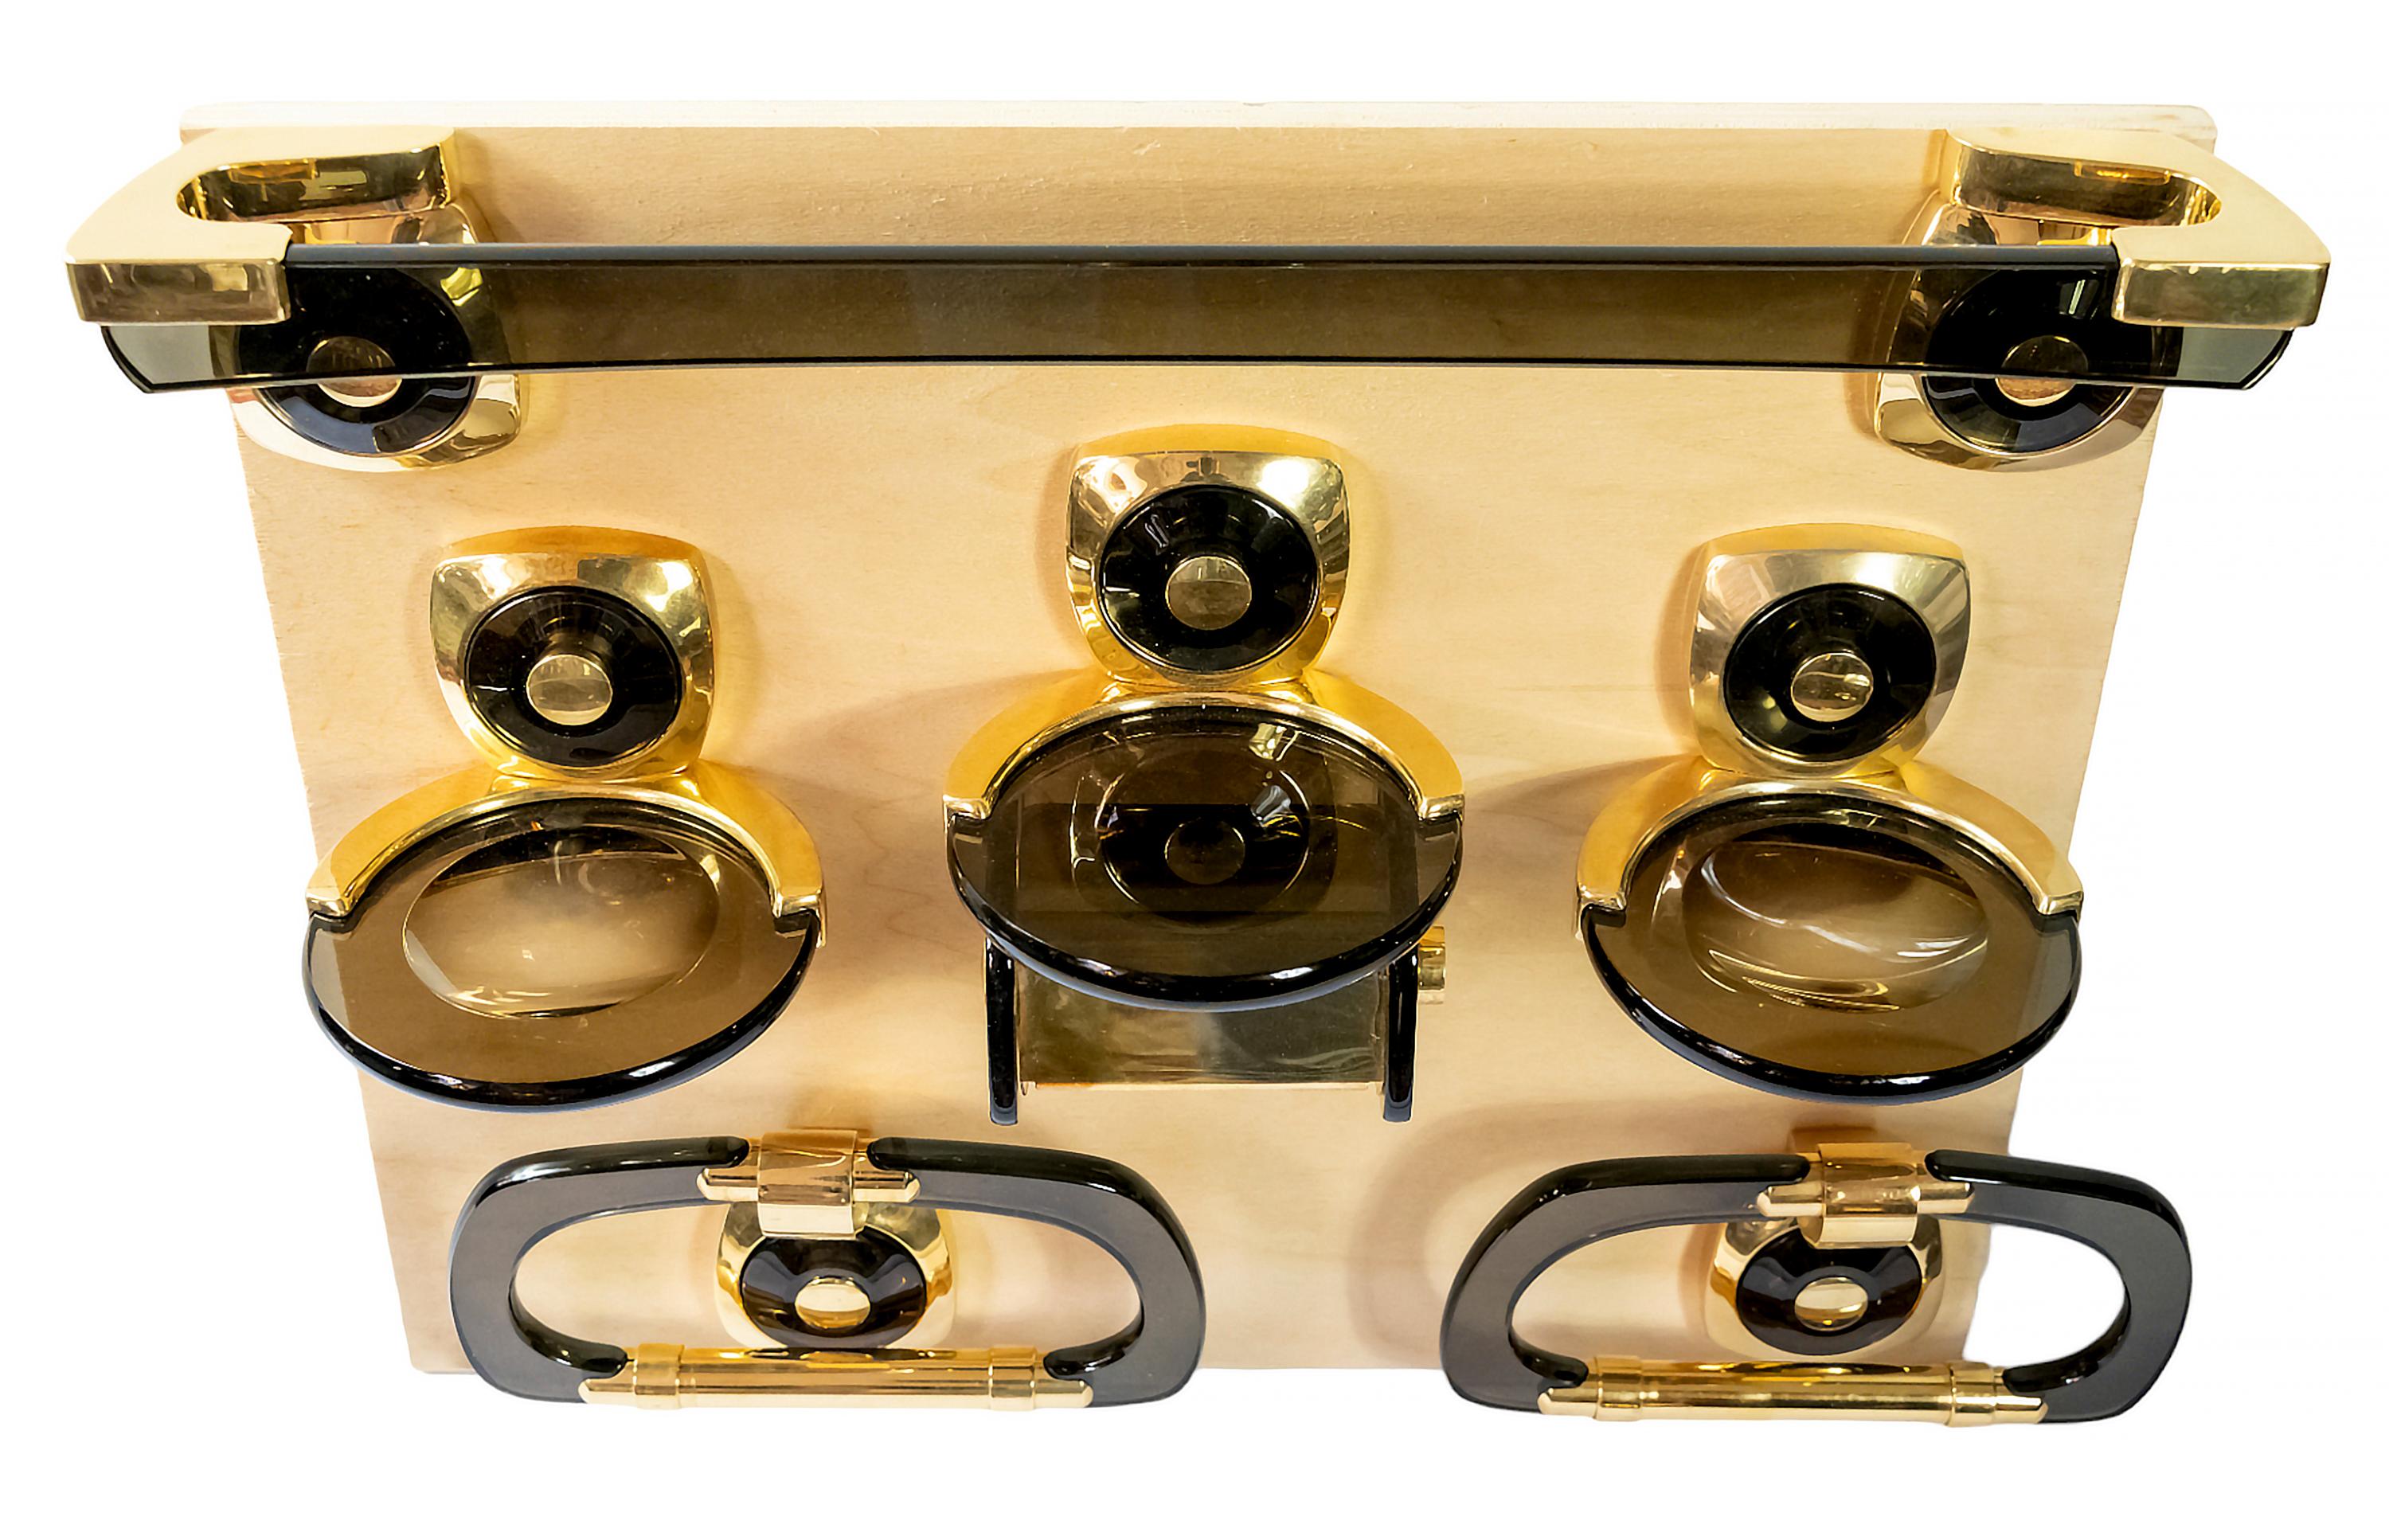 Mid-Century Italian set of bathroom fixtures/accessories from 1970's.
Created in a very solid design. Made from a thick dark brown color plexiglass and gilt brass joints. This set includes 6 pcs. of different accessories.
Dimensions:
Towel rack (1